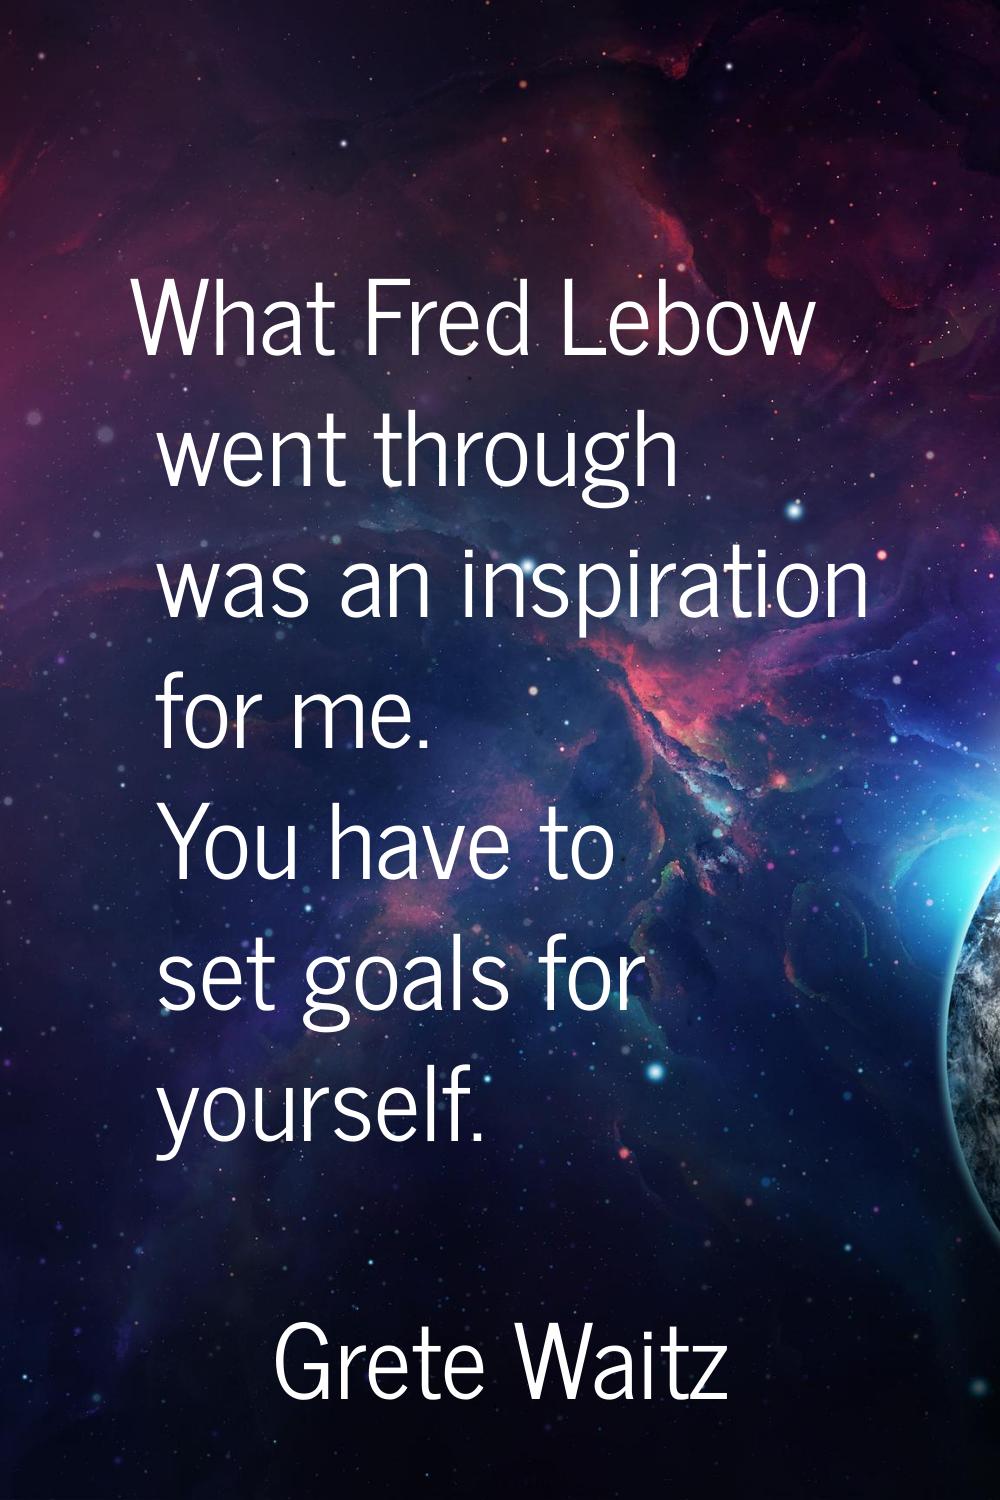 What Fred Lebow went through was an inspiration for me. You have to set goals for yourself.